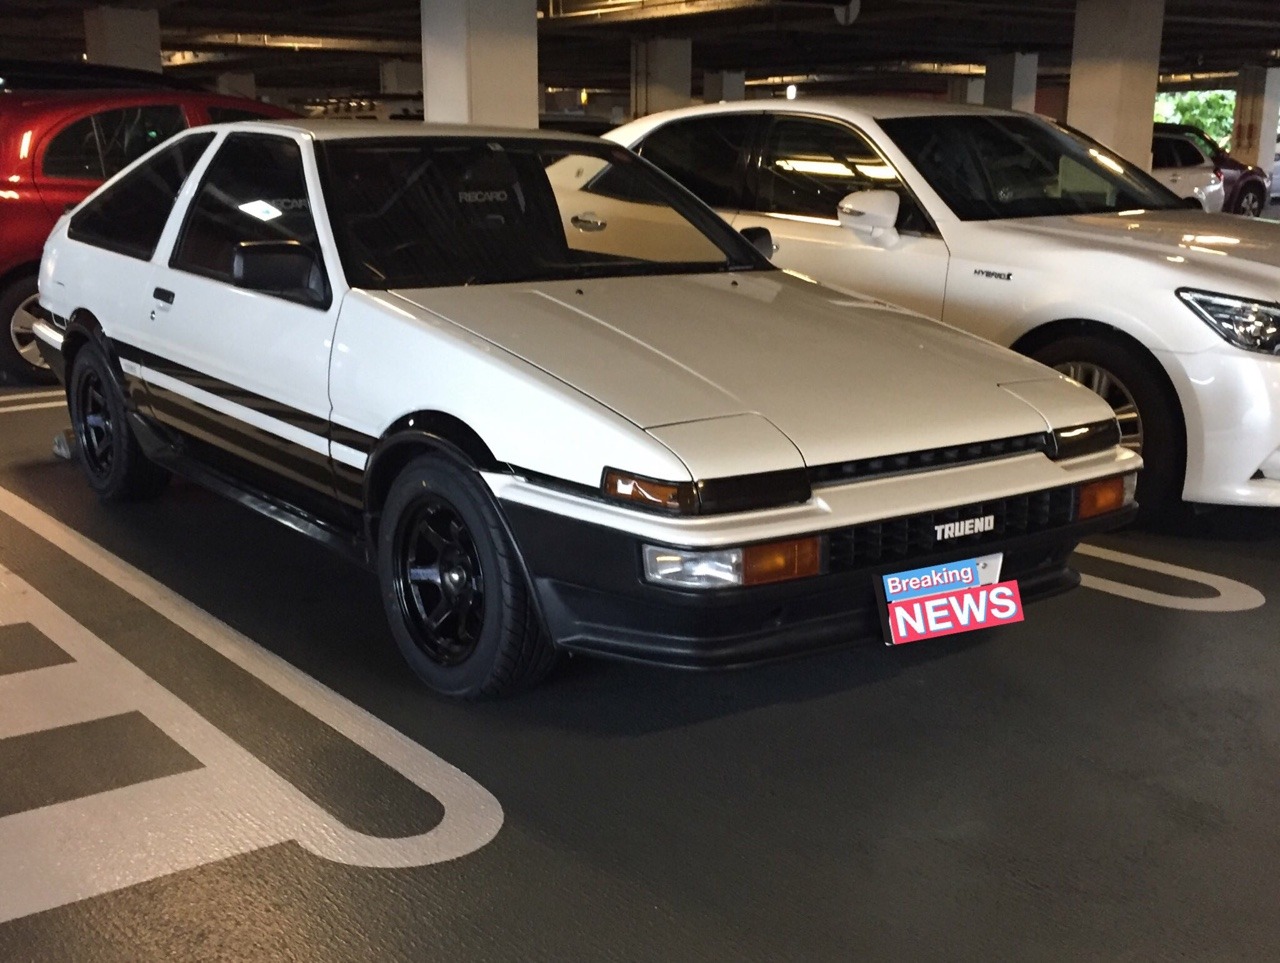 [Image: AEU86 AE86 - A German currently in Japan]